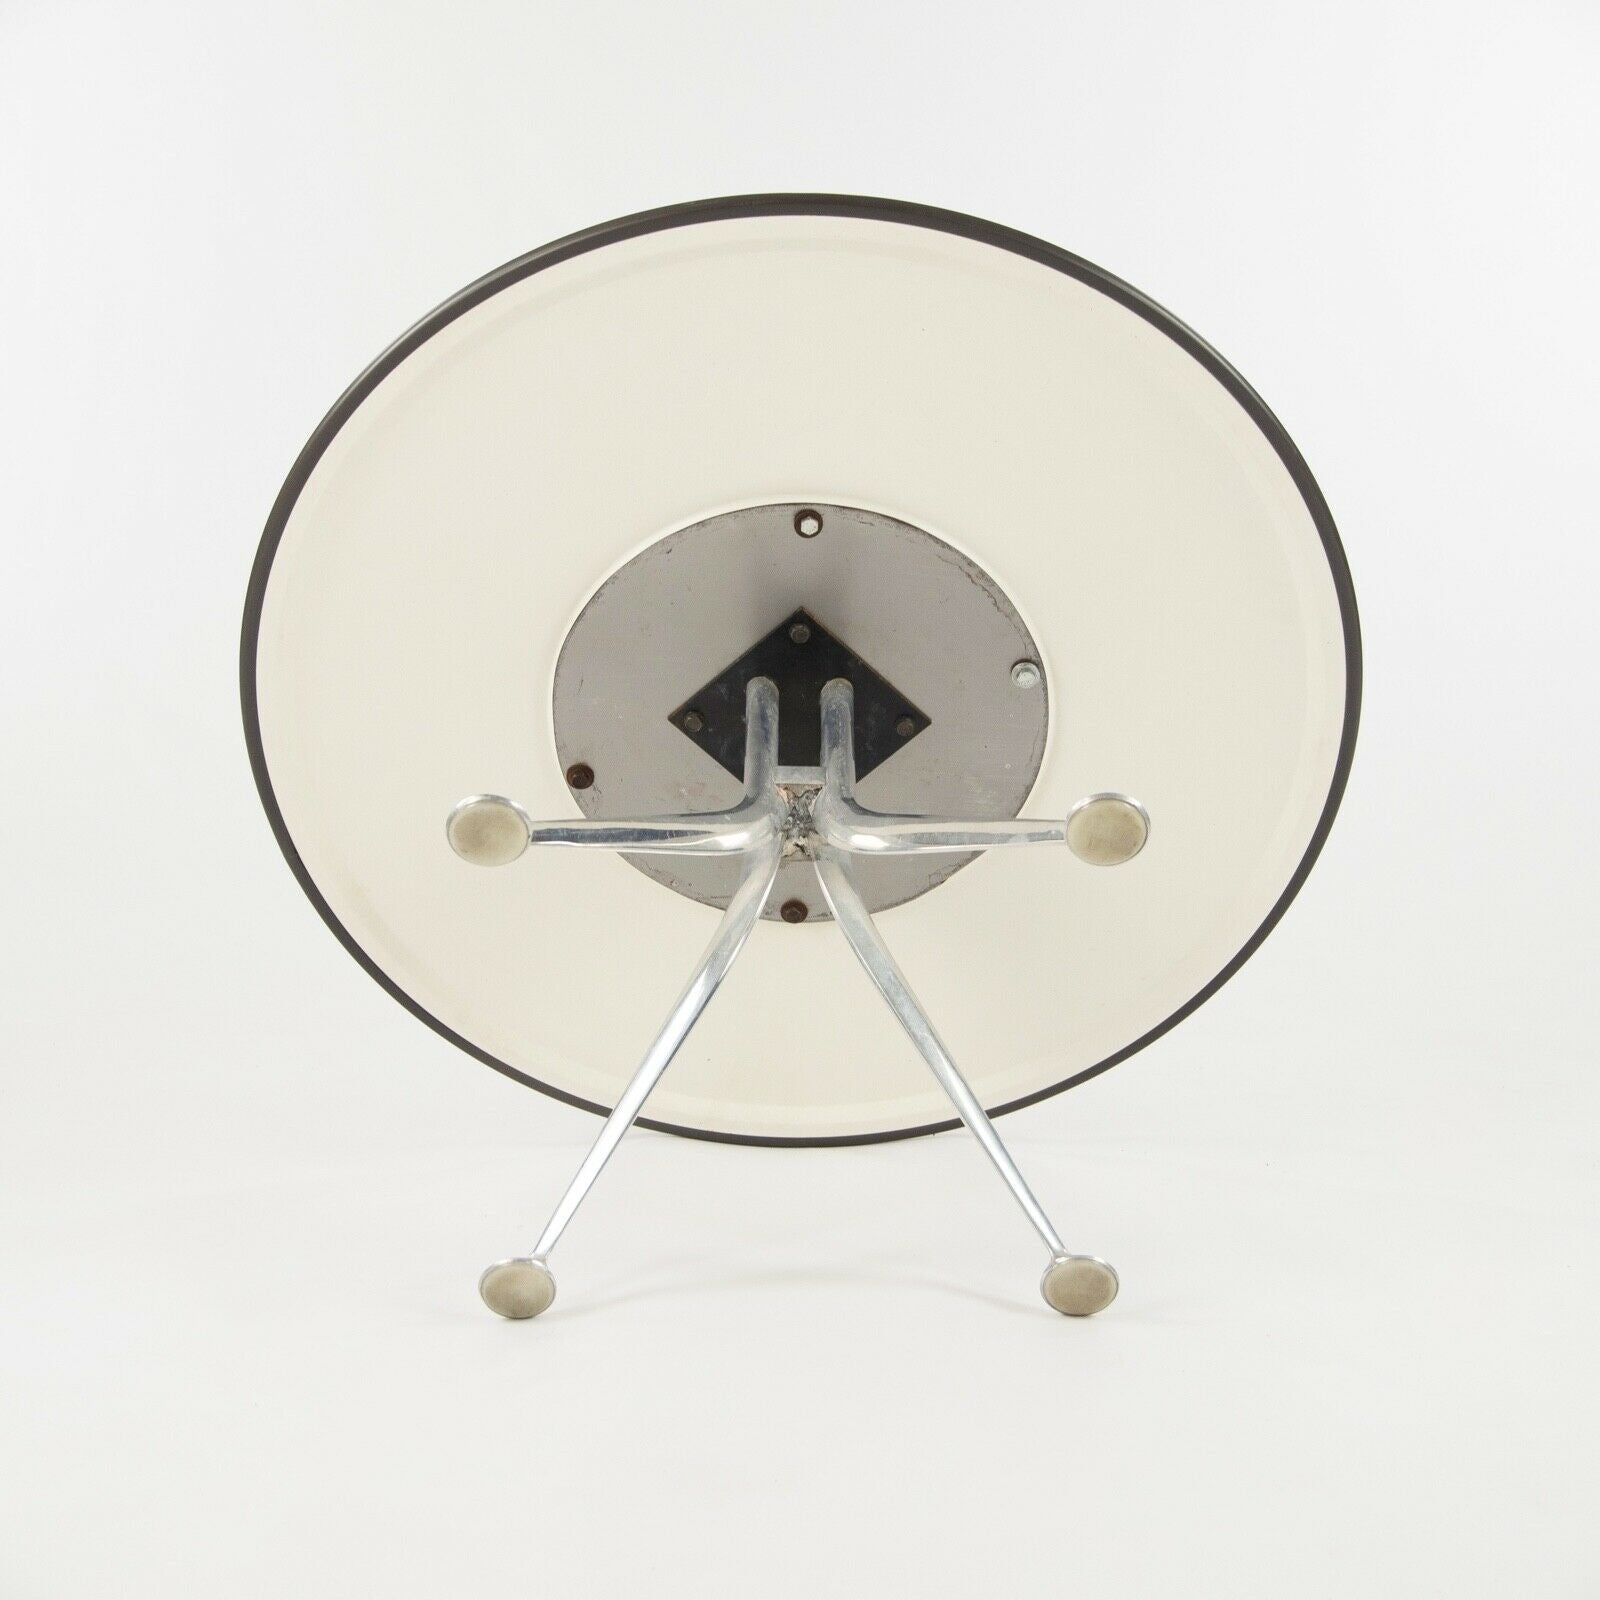 Girard and Eames Collaboration Coffee Table